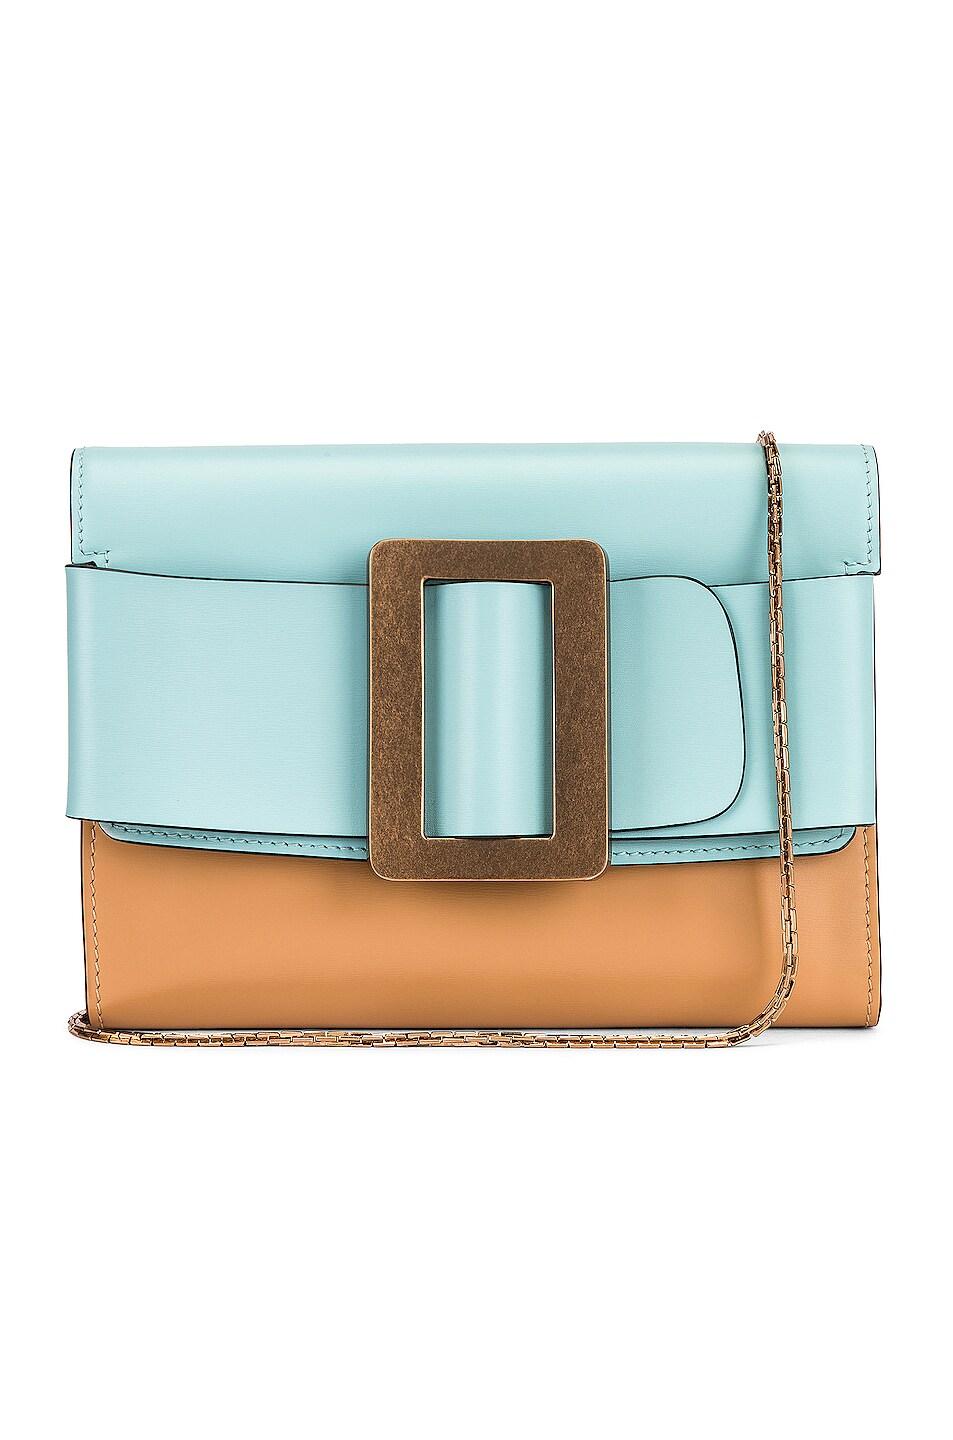 Boyy Leather Buckle Travel Case Two-tone Bag in Blue - Lyst